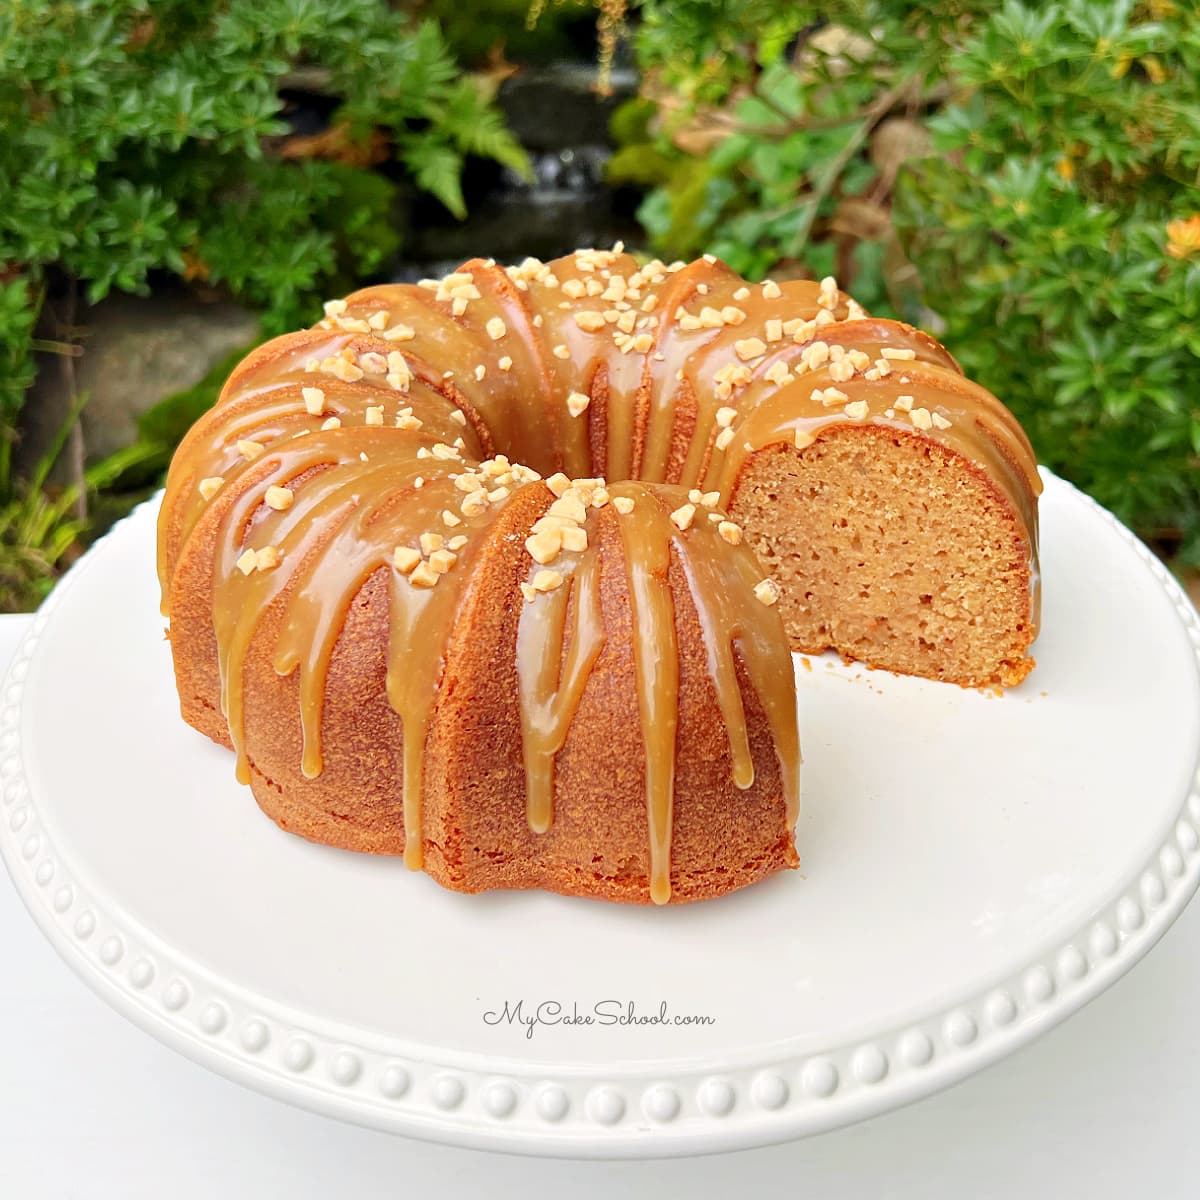 Applesauce cake, sliced, on a pedestal. It is topped with a caramel glaze and toffee bits.